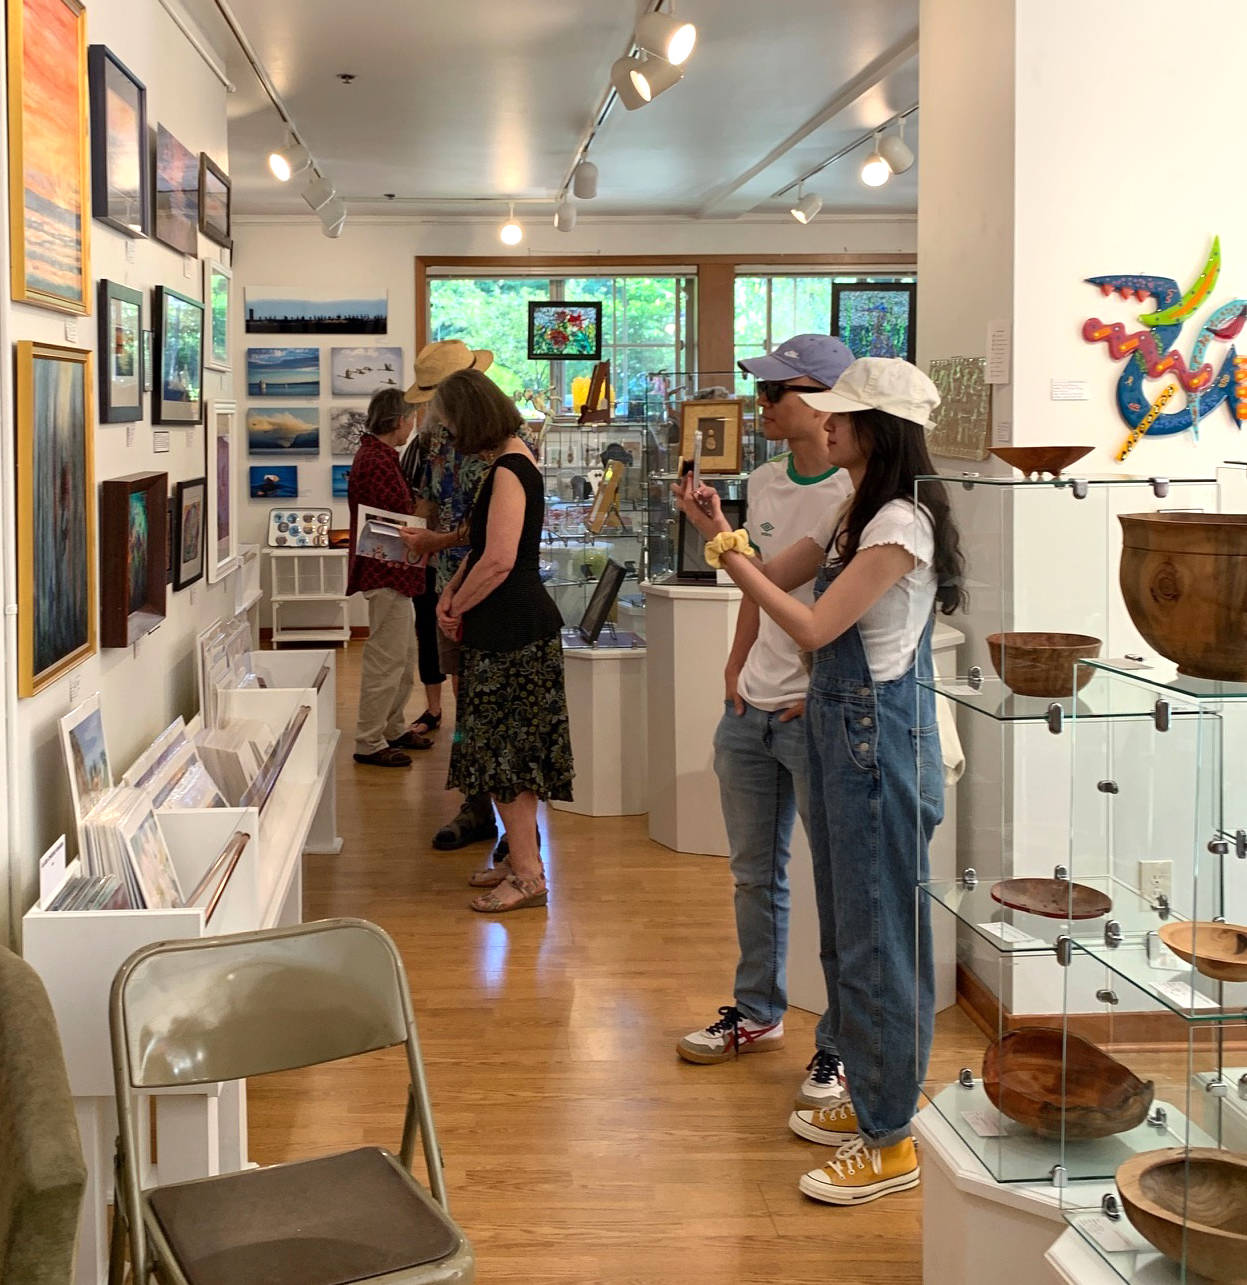 Guests visit Artworks Gallery during July’s First Saturday Art Walk. (Photo courtesy of Artworks Gallery)